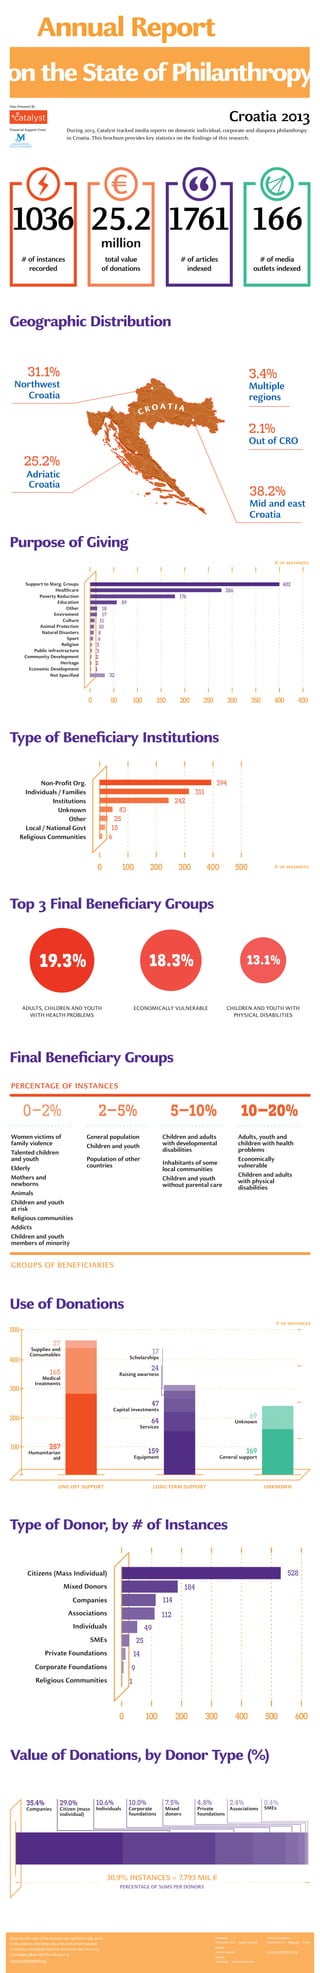 Geographic Distribution
Purpose of Giving
Type of Beneficiary Institutions
Top 3 Final Beneficiary Groups
Final Beneficiary Groups
Use of Donations
Type of Donor, by # of Instances
Value of Donations, by Donor Type (%)
Support to Marg. Groups
Healthcare
Poverty Reduction
Education
Other
Enviroment
Culture
Animal Protection
Natural Disasters
Sport
Religion
Public infrastructure
Community Development
0 50 100 150 200 250 300
Heritage
350 400
Economic Development
402
286
176
59
18
17
11
10
8
6
3
3
2
1
32Not Specified
450
2
Non-Profit Org.
Individuals / Families
Institutions
Unknown
Other
Local / National Govt
Religious Communities
0 100 200 300 400 500
394
311
242
43
25
15
6
0–2% 2–5% 5–10% 10–20%
Women victims of
family violence
Talented children
and youth
Elderly
Mothers and
newborns
Animals
Children and youth
at risk
Religious communities
Addicts
Children and youth
members of minority
General population
Children and youth
Population of other
countries
Children and adults
with developmental
disabilities
Inhabitants of some
local communities
Children and youth
without parental care
Adults, youth and
children with health
problems
Economically
vulnerable
Children and adults
with physical
disabilities
PERCENTAGE OF INSTANCES
GROUPS OF BENEFICIARIES
27
Supplies and
Consumables 17
Scholarships
24
Raising awarness
64
Services
47
Capital investments
69
Unknown
169
General support
287
Humanitarian
aid
100
200
400
500
ONE-OFF SUPPORT LONG-TERM SUPPORT UNKNOWN
165
Medical
treatments
159
Equipment
300
Mixed Donors
Companies
Citizens (Mass Individual)
Associations
Individuals
SMEs
Private Foundations
Corporate Foundations
0 100 200 300 400 500
528
184
114
112
49
25
9
14
1
600
Religious Communities
35.4%
Companies
29.0%
Citizen (mass
individual)
10.6%
Individuals
10.0%
Corporate
foundations
7.5%
Mixed
donors
4.8%
Private
foundations
2.4%
Associations
30.9% INSTANCES = 7.793 MIL €
PERCENTAGE OF SUMS PER DONORS
0.4%
SMEs
C R O A T I A
31.1%
Northwest
Croatia
3.4%
Multiple
regions
25.2%
Adriatic
Croatia
2.1%
Out of CRO
38.2%
Mid and east
Croatia
1761 16625.2million
1036
# of instances
recorded
# of articles
indexed
# of media
outlets indexed
total value
of donations
Annual Report
on the State of Philanthropy
1761 16625.2
million
1036
# of instances
recorded
# of articles
indexed
# of media
outlets indexed
total value
of donations
19.3% 18.3% 13.1%
ADULTS, CHILDREN AND YOUTH
WITH HEALTH PROBLEMS
ECONOMICALLY VULNERABLE CHILDREN AND YOUTH WITH
PHYSICAL DISABILITIES
Croatia 2013
# of instances
# of instances
# of instances
Catalyst Foundation
Makedonska 21  Belegrade Serbia
www.catalystbalkans.org
authors
Aleksandra Vesić  Nathan Koeshall
editor
Nathan Koeshall
design
Ivo Matejin  Fondacija Dokukino
During 2013, Catalyst tracked media reports on domestic individual, corporate and diaspora philanthropy
in Croatia. This brochure provides key statistics on the findings of this research.
Given that the value of the donation was reported in only 30.9%
of the instances, estimation about the total amount donated
is made by extrapolation based on the known data. For more
information, please find the full report at
www.catalystbalkans.org
Data Powered By
Financial Support From
 